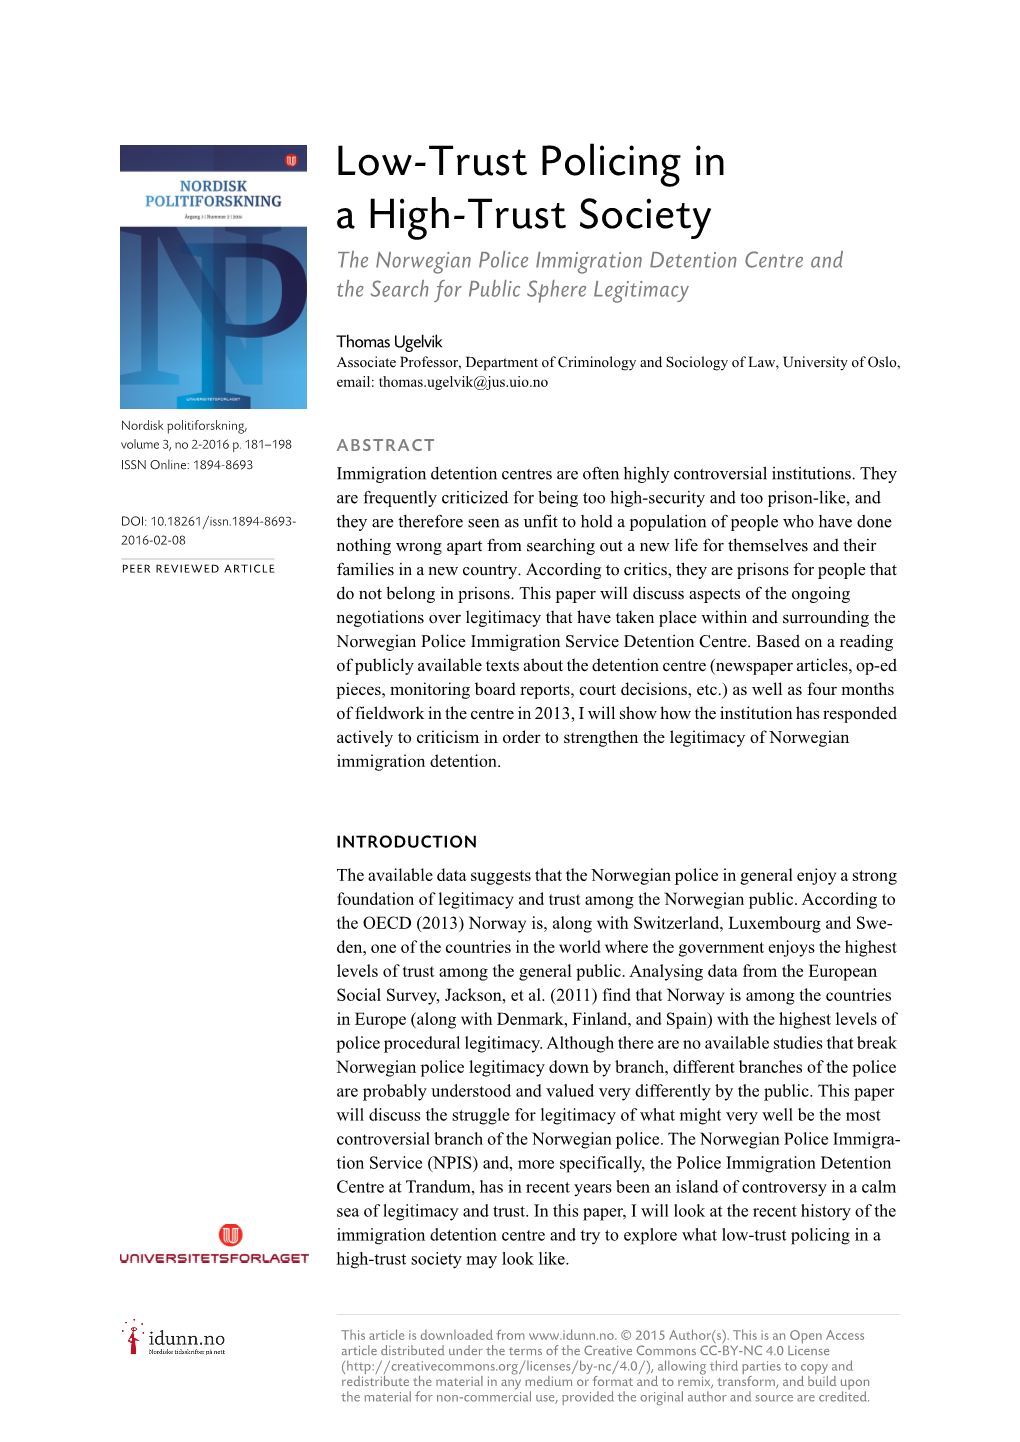 Low-Trust Policing in a High-Trust Society the Norwegian Police Immigration Detention Centre and the Search for Public Sphere Legitimacy